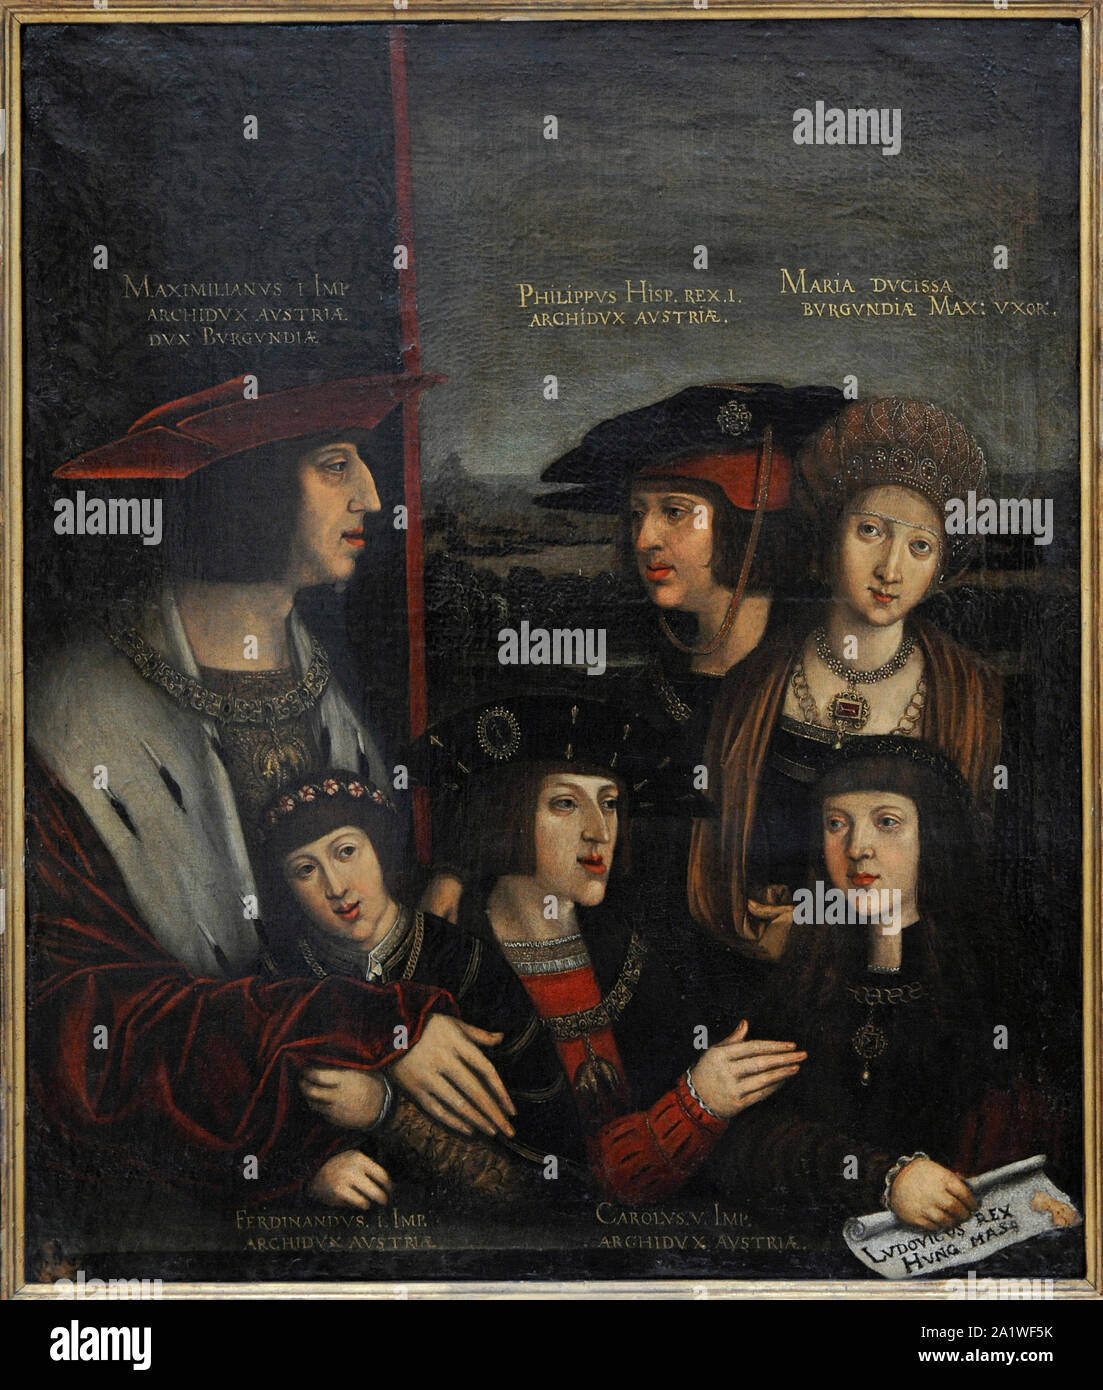 Bernhard Strigel (1461-1528). German painter. Emperor Maximilian I with his family, 1516-1520 (Maximilian I with his wife Mary of Burgundy, his son Philip the Fair, his grandsons Ferdinand I and Charles V, and Louis of Hungary). San Fernando Royal Academy of Fine Arts. Madrid. Spain. Stock Photo